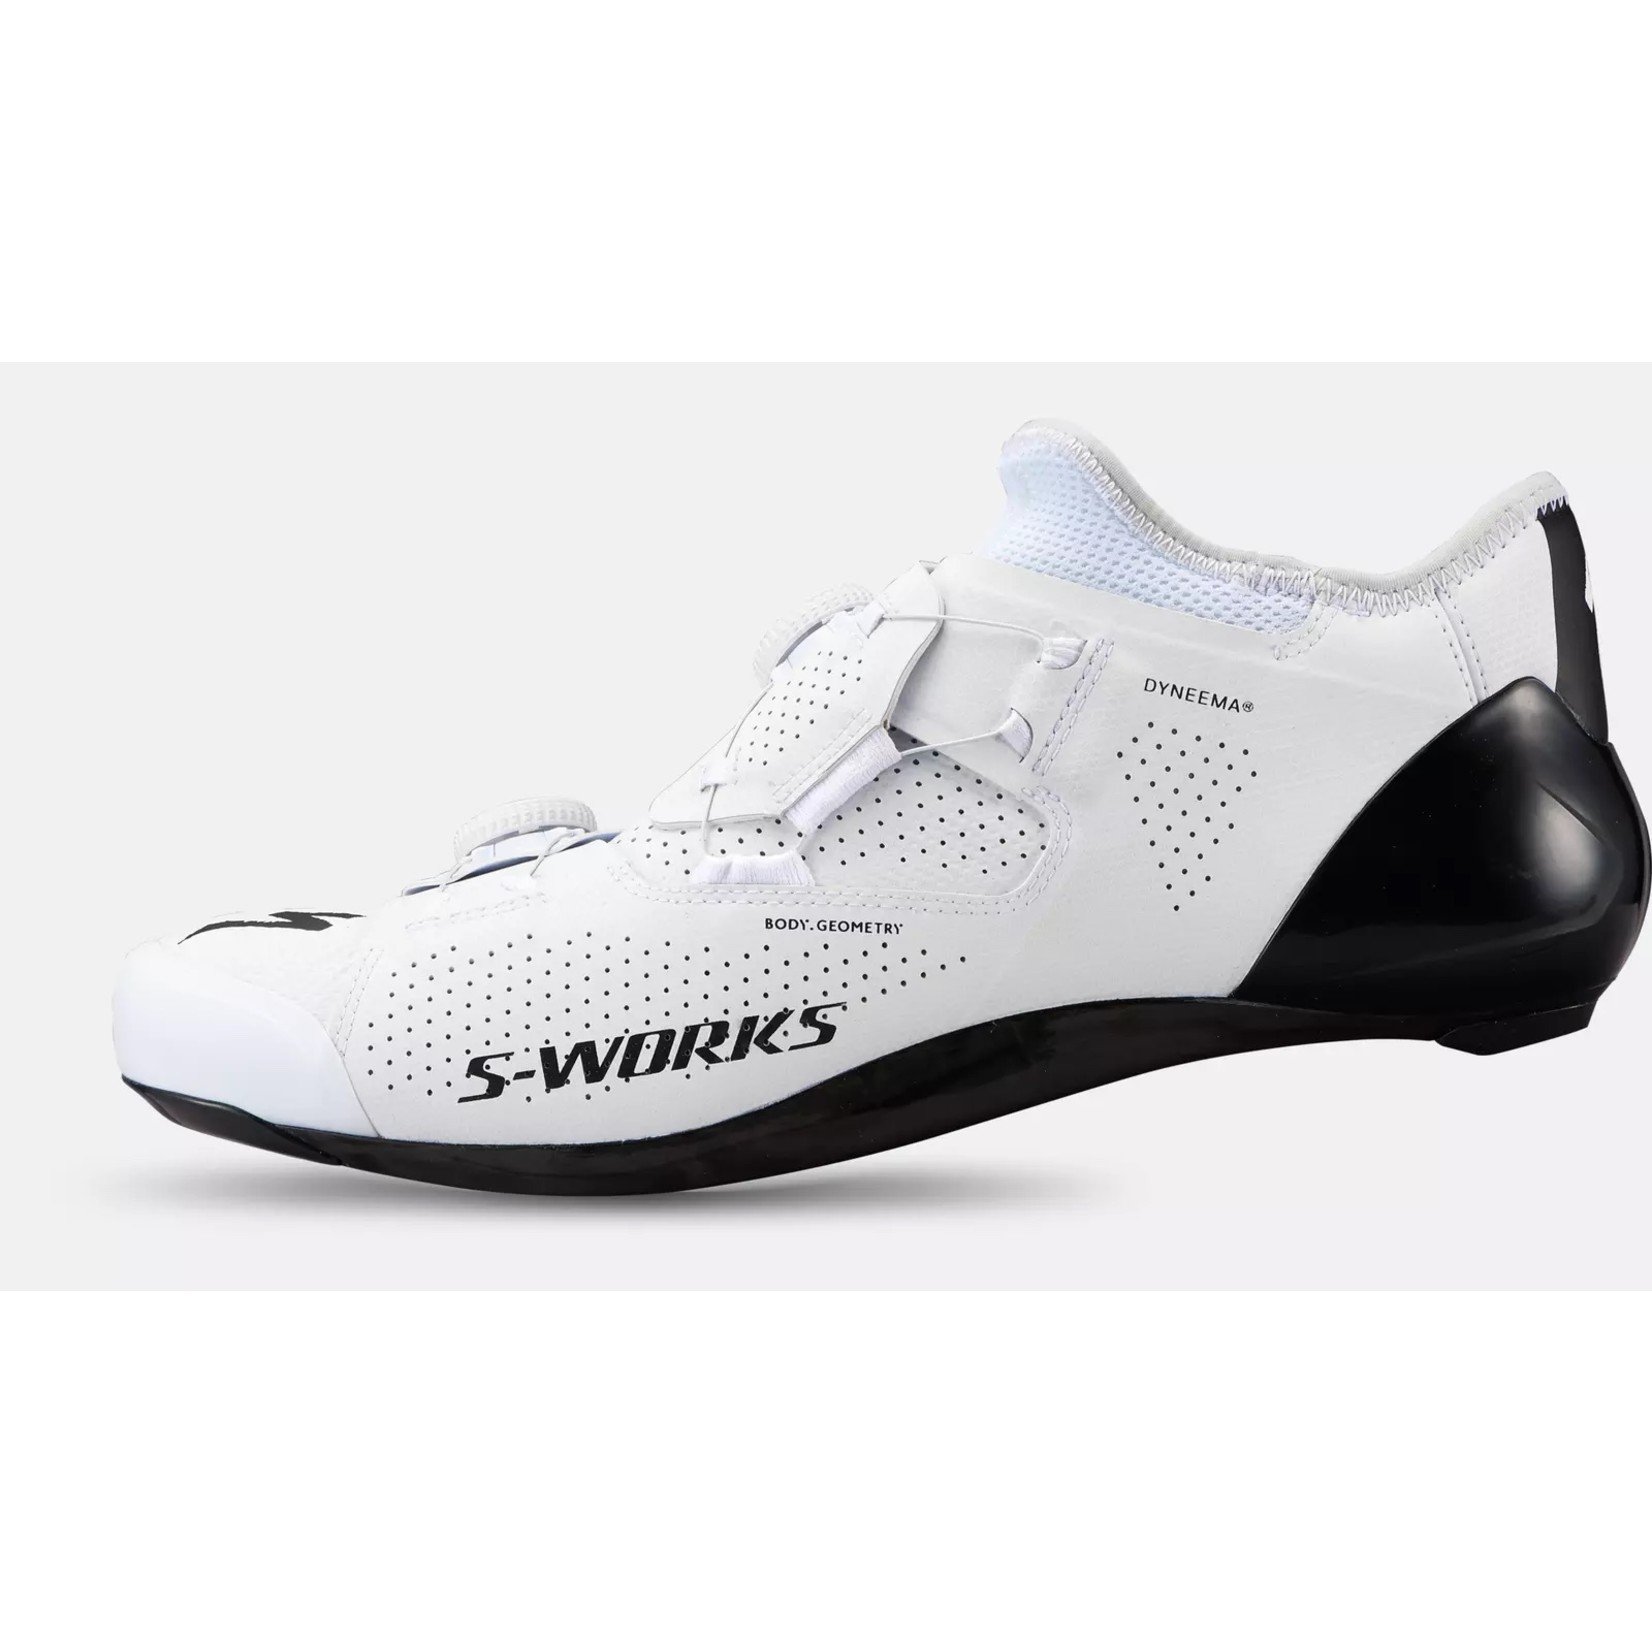 S-WORKS ARES - TEAM WHITE - Golden Sports Inc.